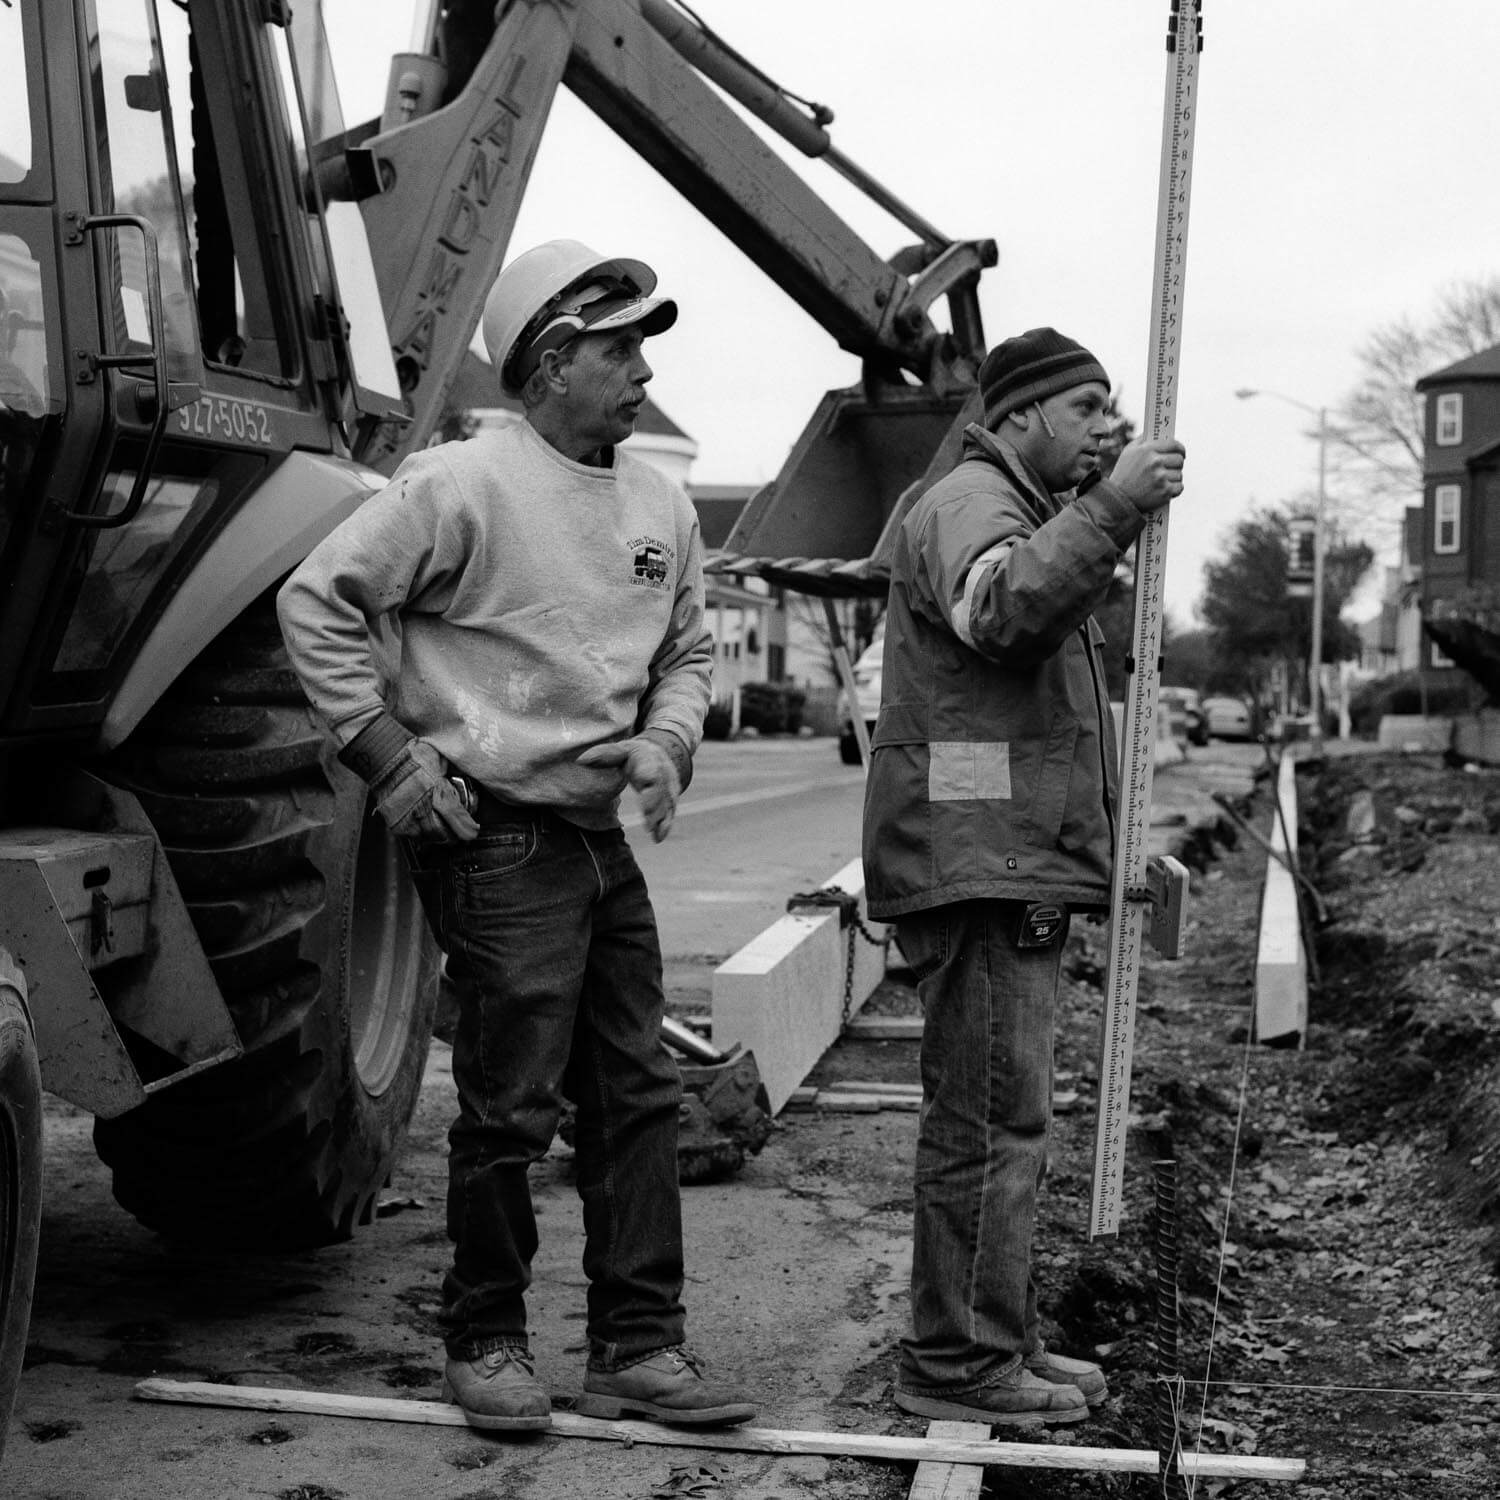 Guys putting down street curbs - This image seems to fit the square format naturally. I used a Hasselblad 500 CM and a 150mm telephoto lens on Kodak T-MAX 400